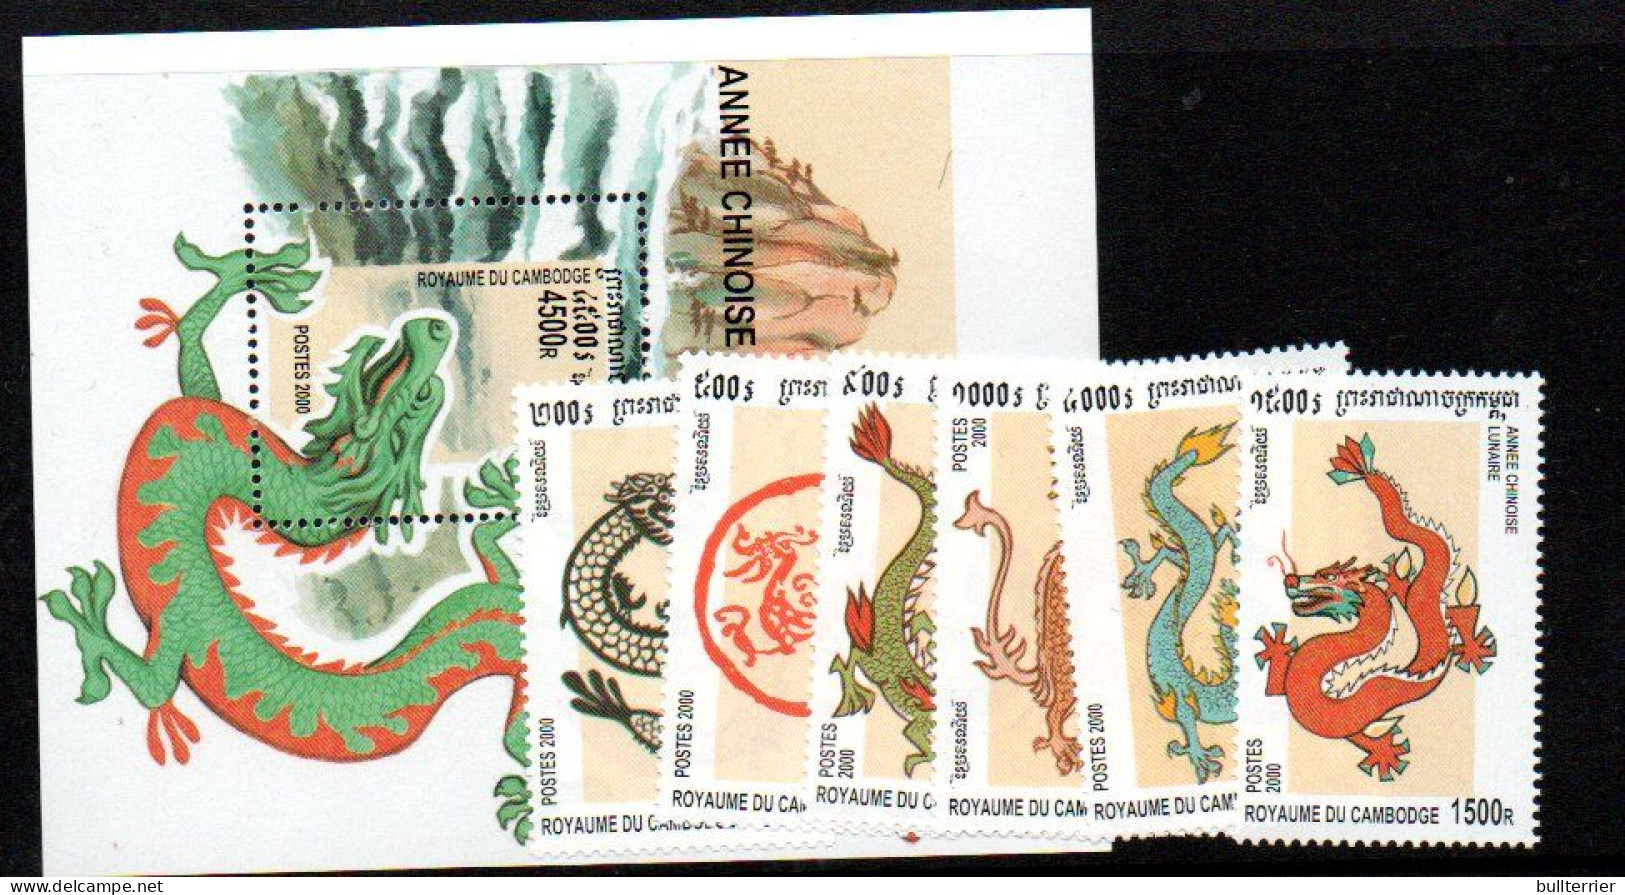 CAMBODIA - 2001- YEAR  OF THE DRAGON SET OF 6 + SOUVENIR SHEET  MINT NEVER HINGED - Cambodia